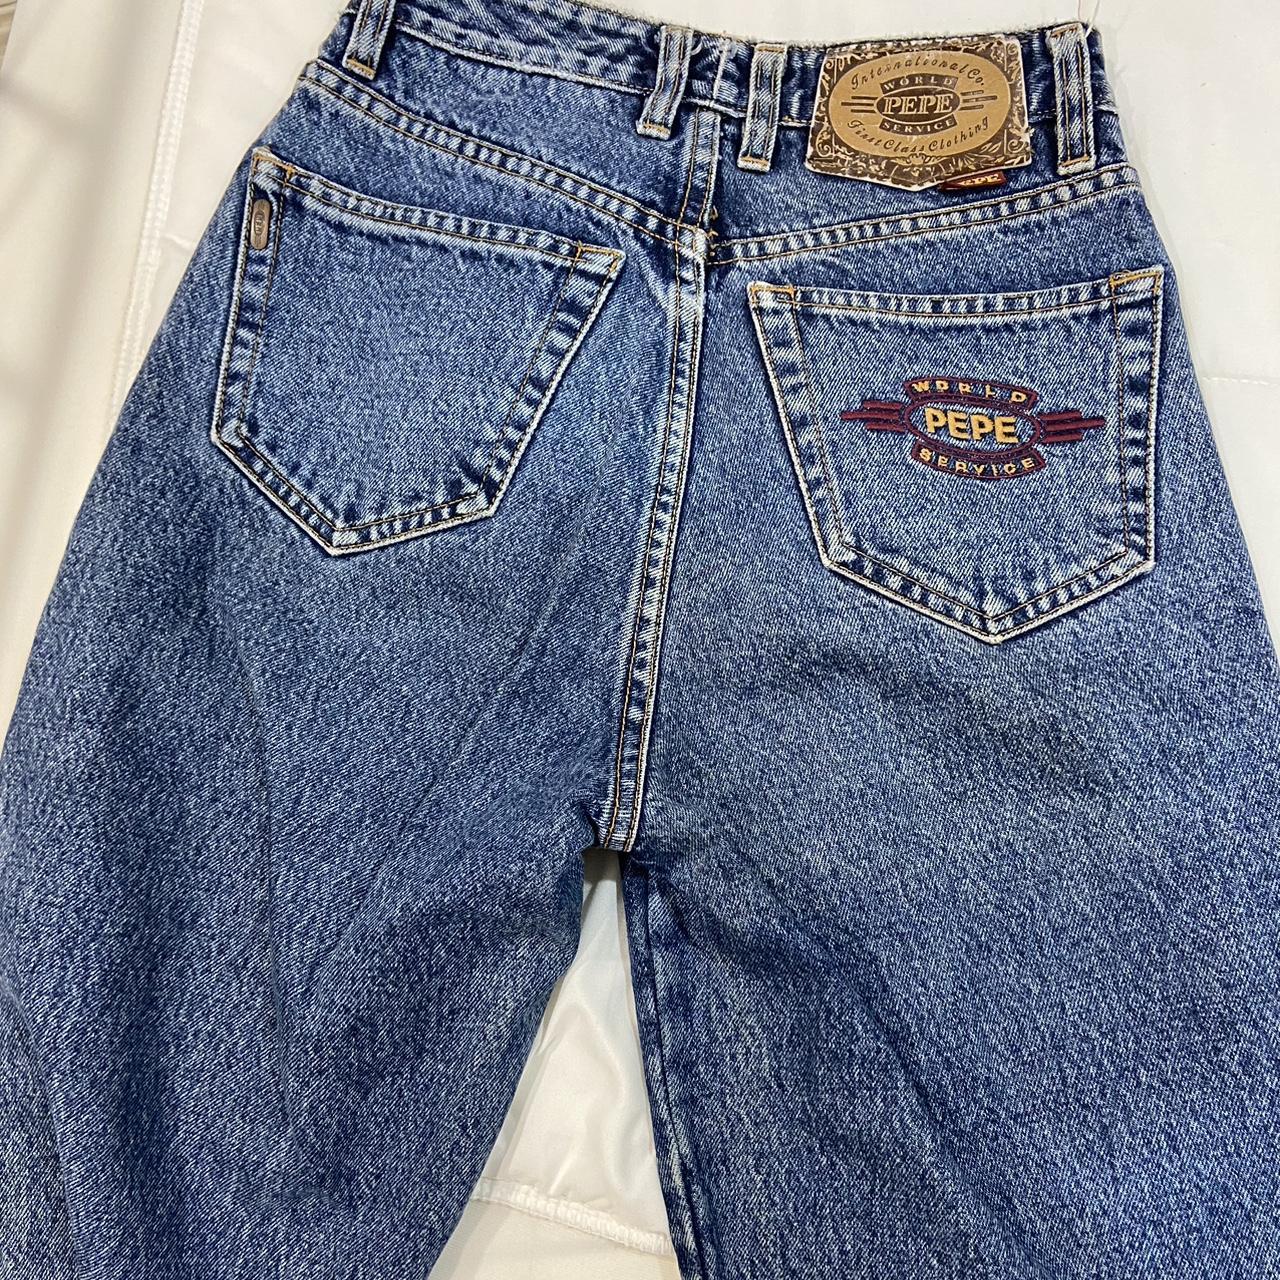 Pepe Jeans seamless buttoned back pockets, tailored - Depop